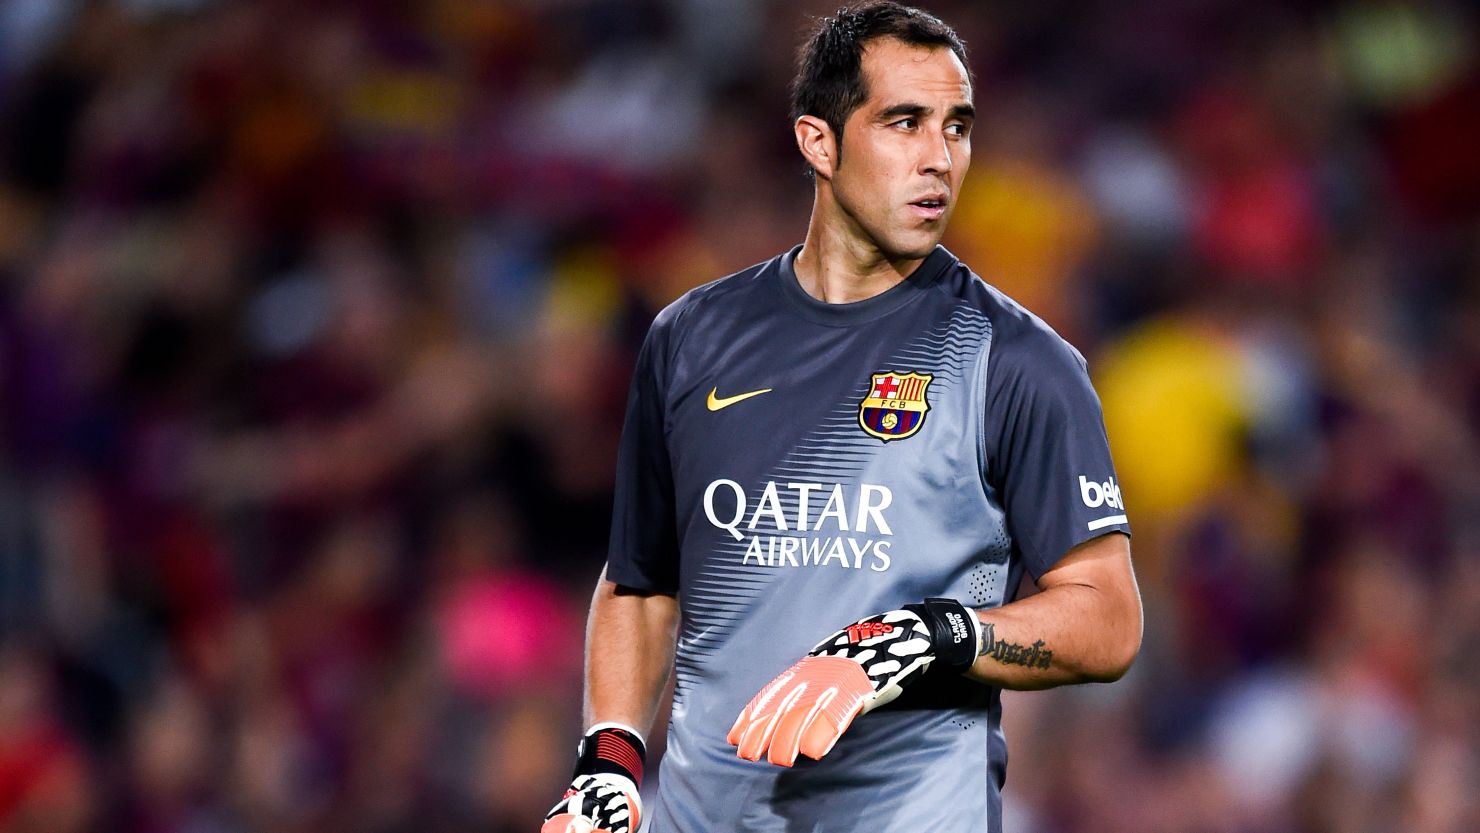 Claudio Bravo has keep a clean sheet for seven straight games in the La Liga this season. 